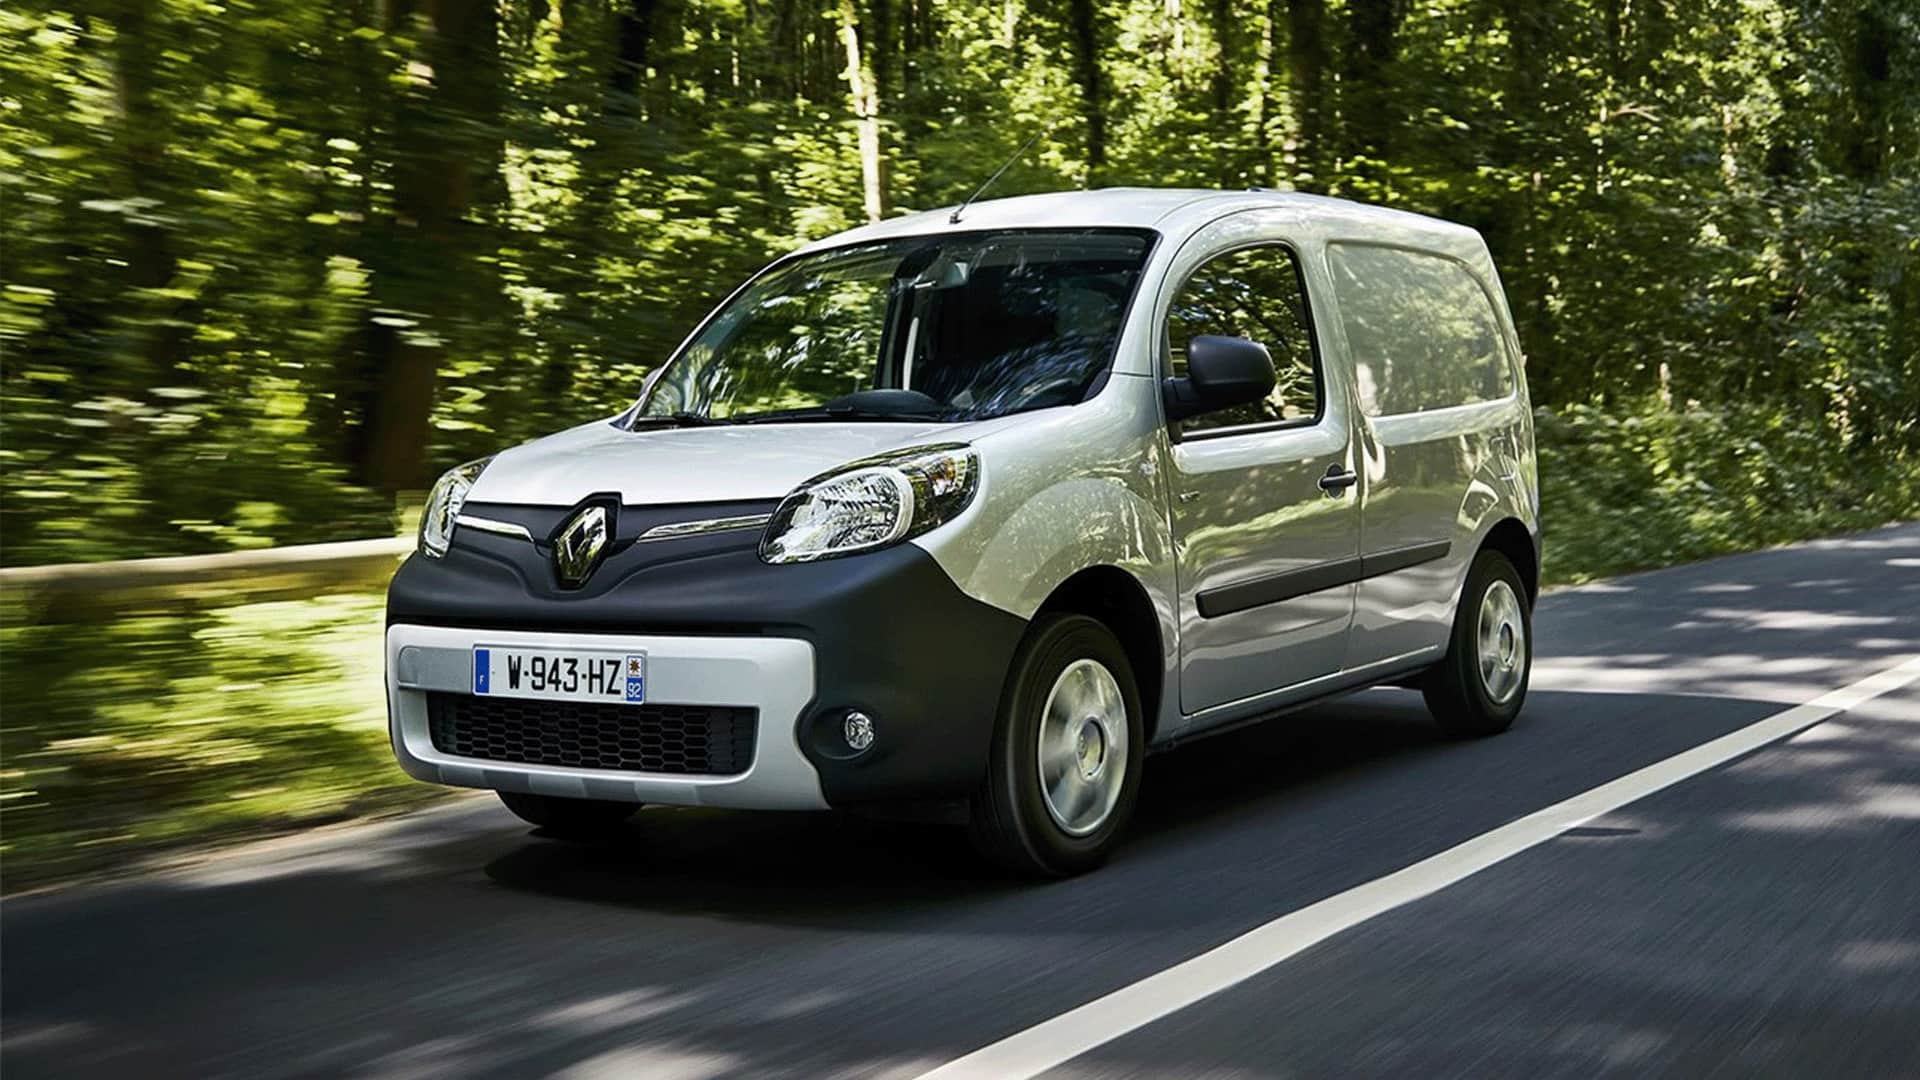 Grey Renault Kangoo ZE driving the cemented road in forest